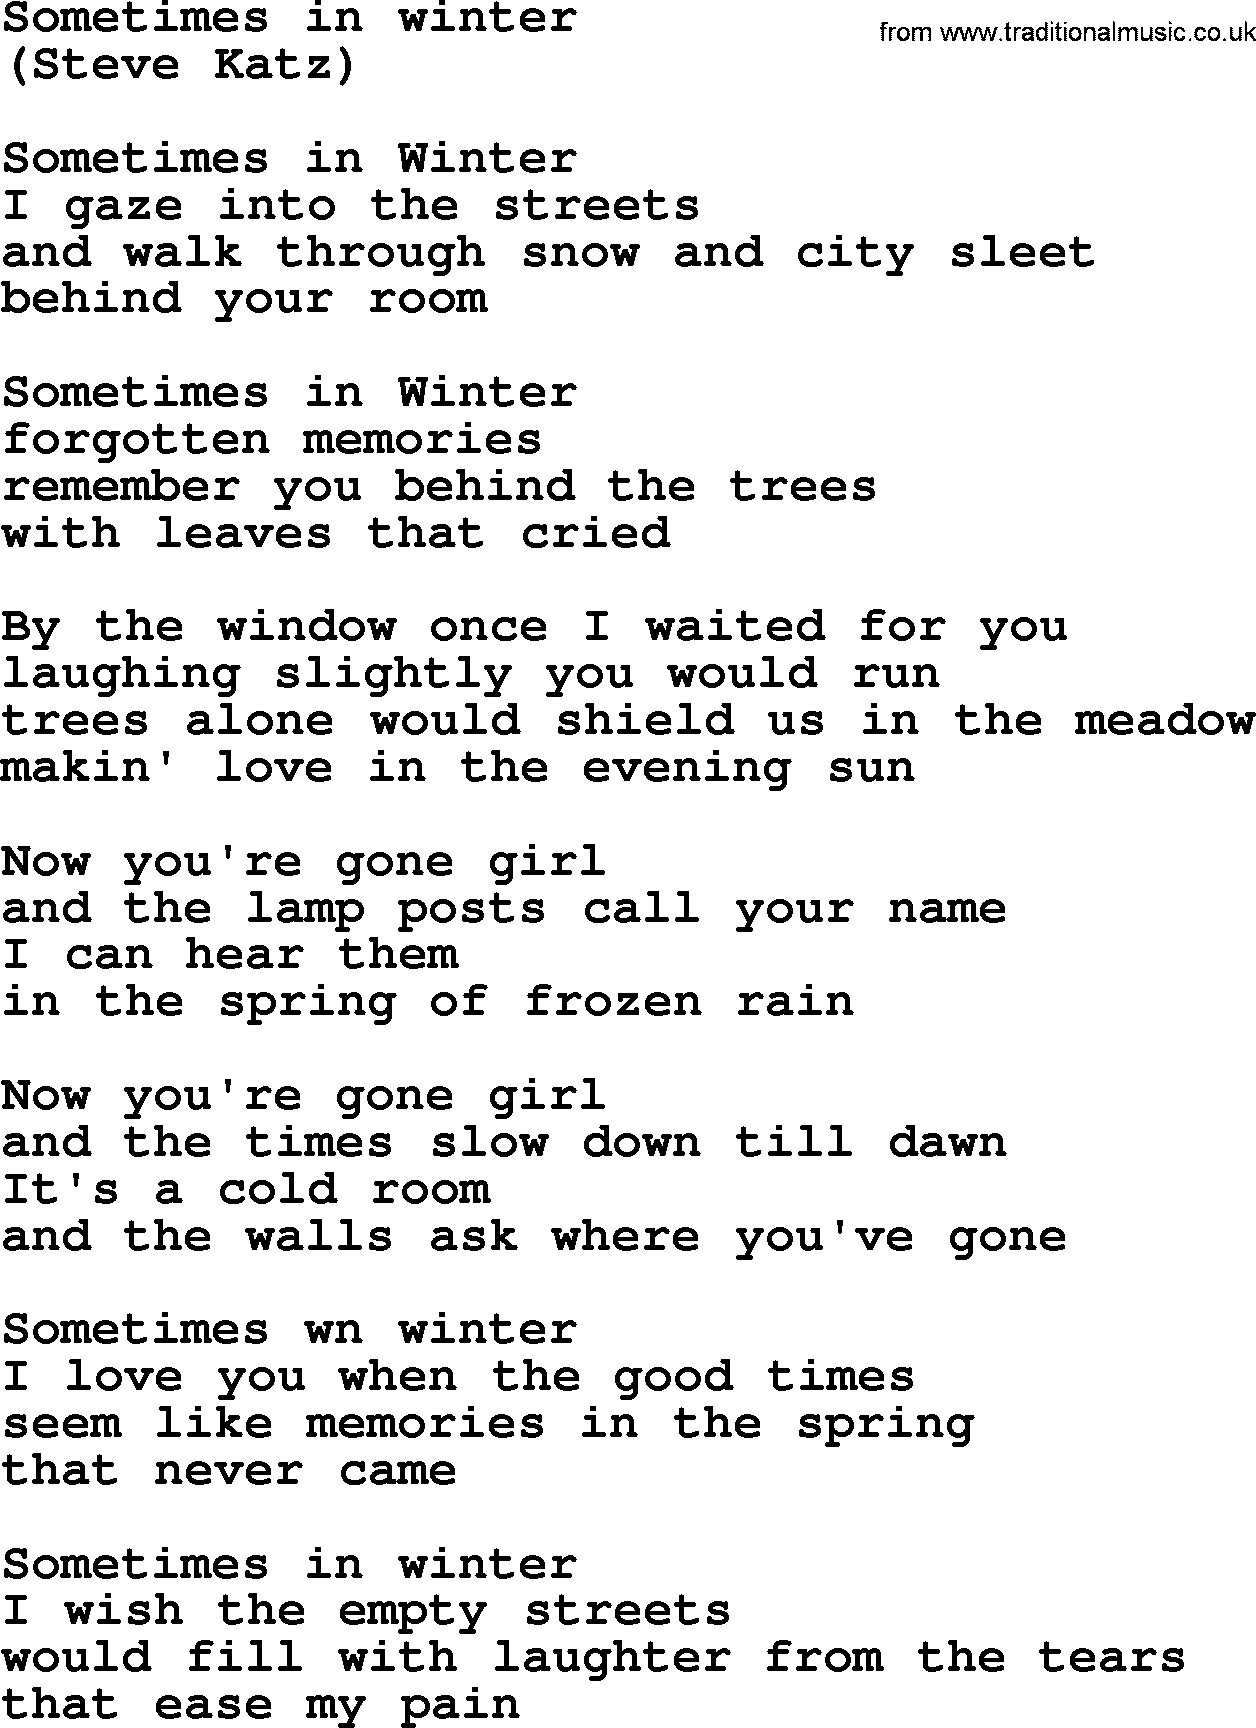 The Byrds song Sometimes In Winter, lyrics